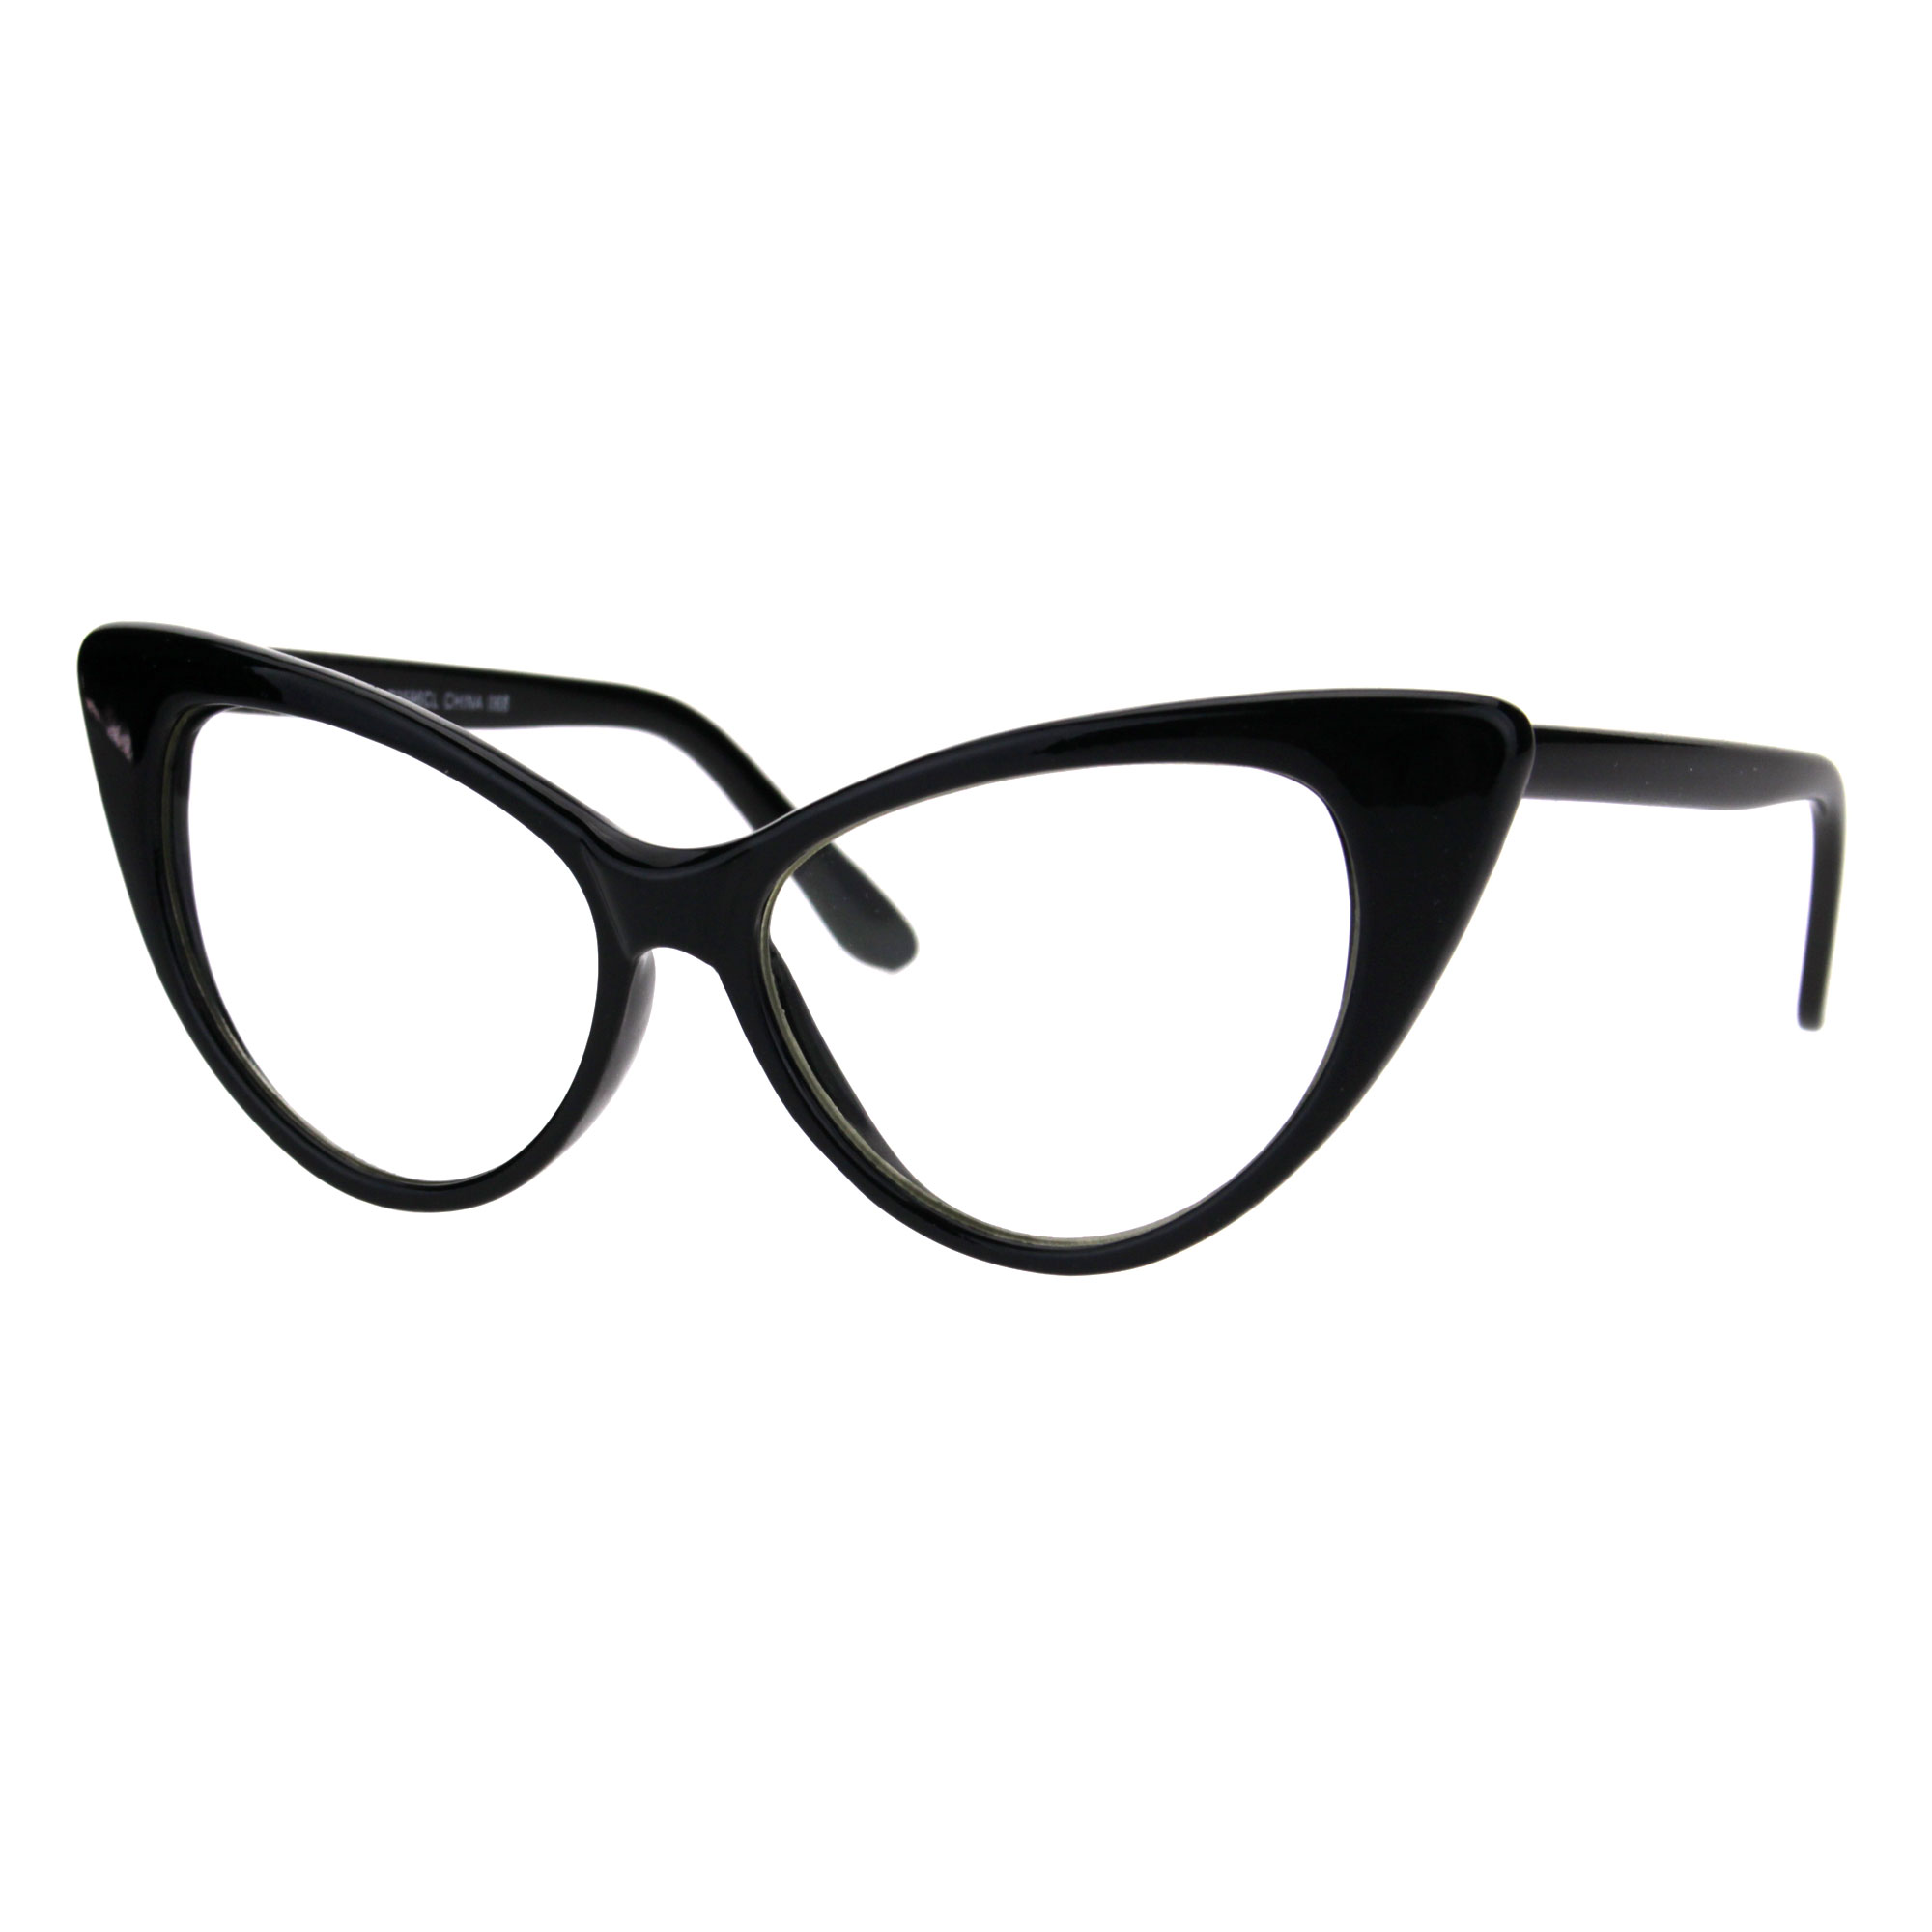 Classic Womens Gothic Clear Lens Cat Eye Glasses Black - image 2 of 3